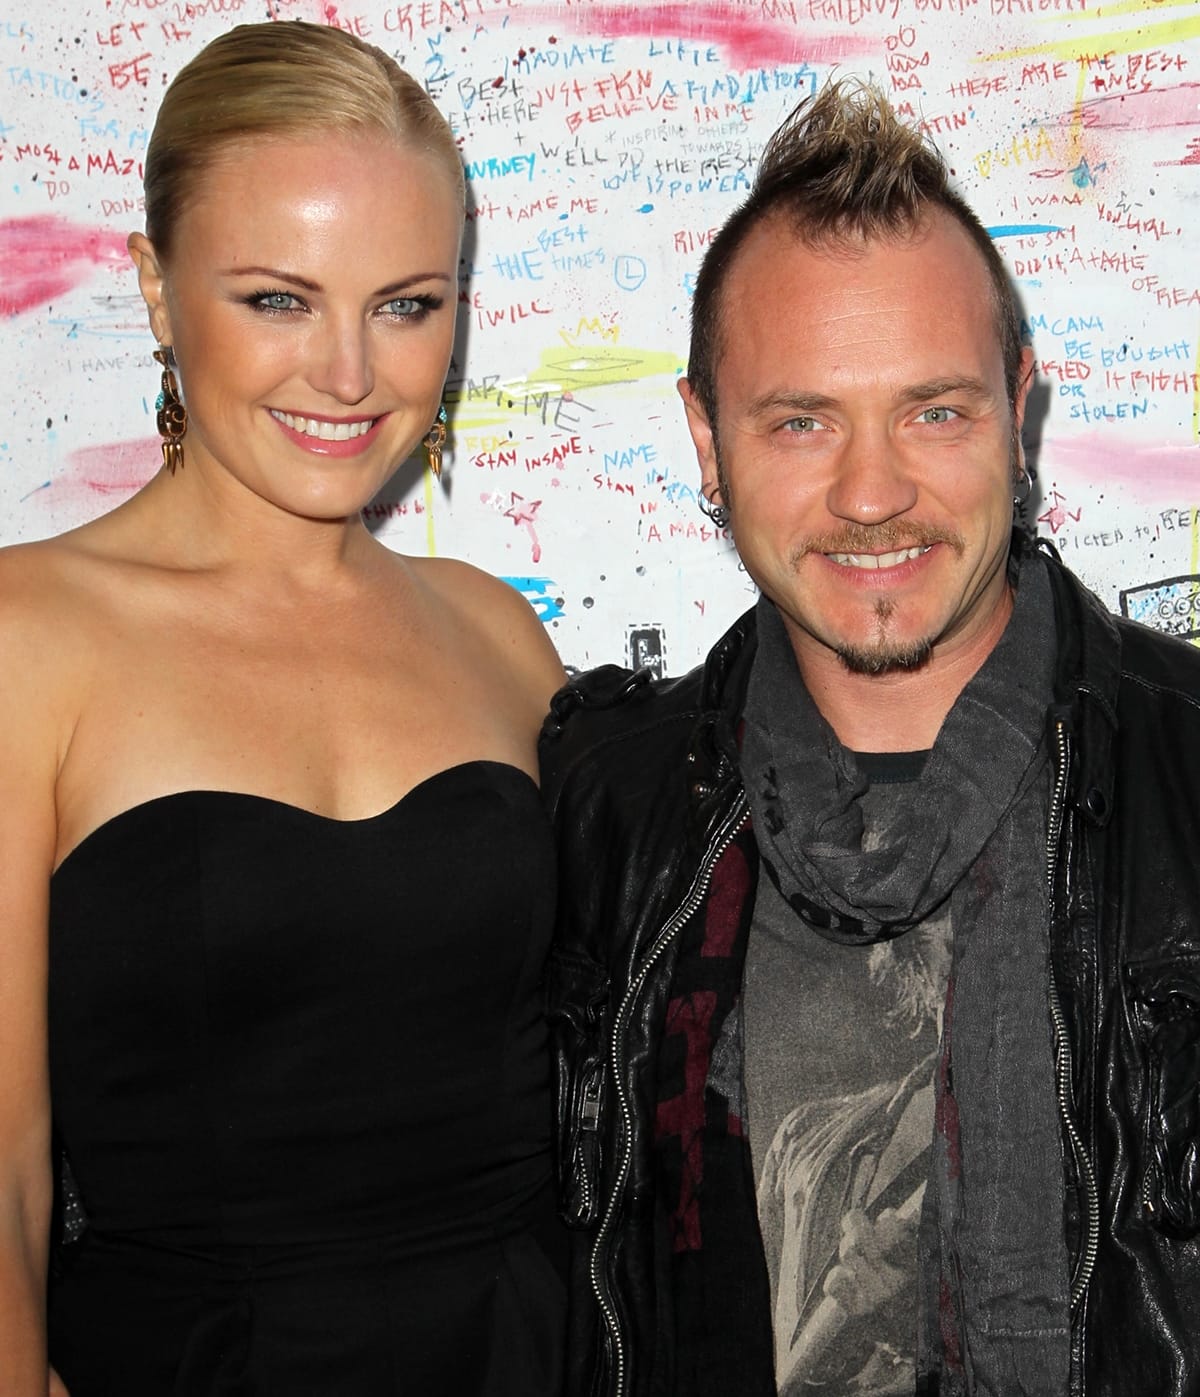 Malin Akerman and Roberto Zincone married in an Italian wedding in 2007 and split in late 2013, just months after she gave birth to their baby boy Sebastian Zincone